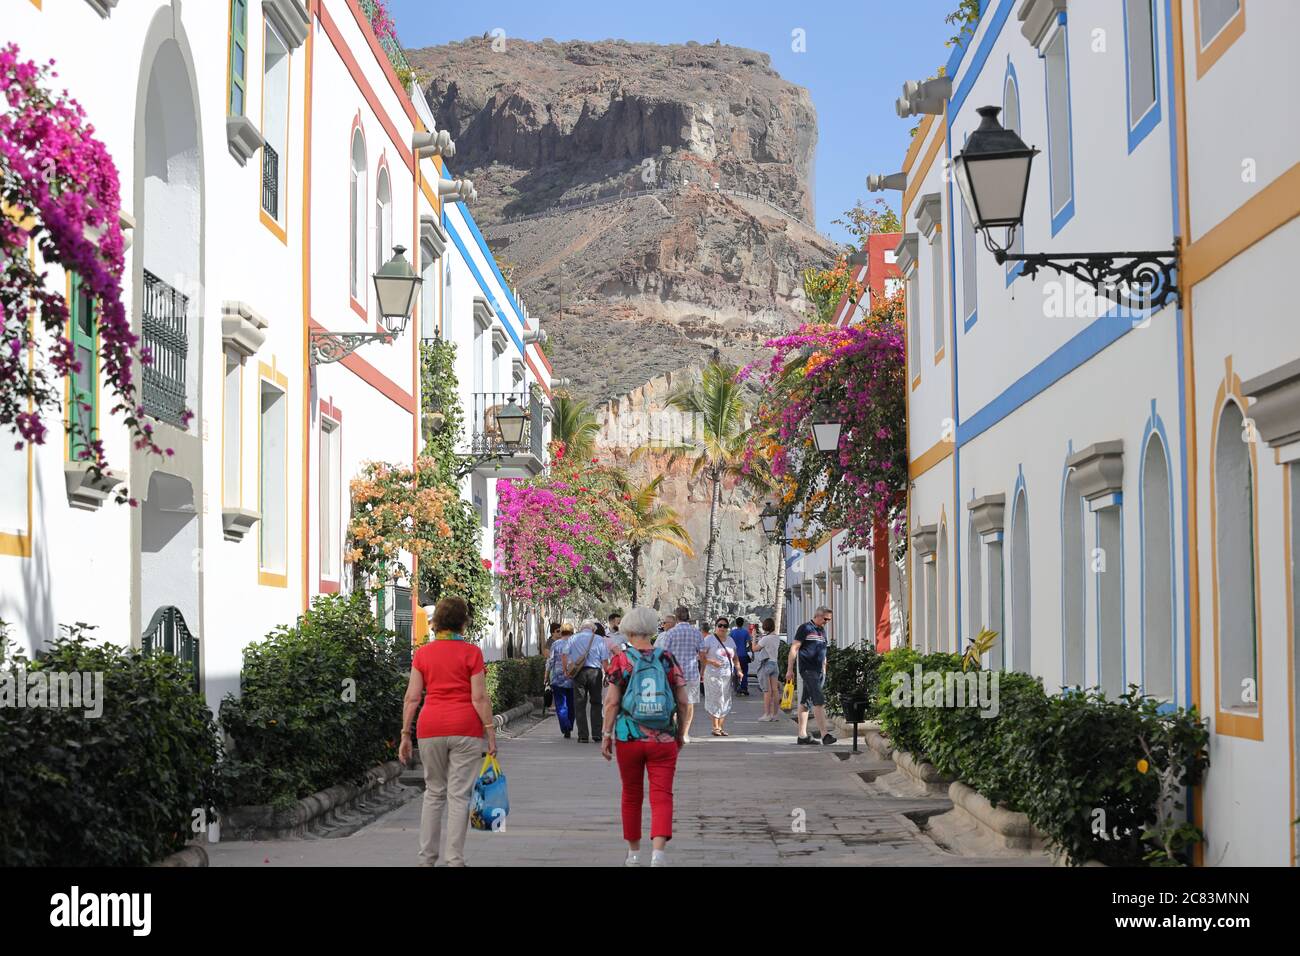 Mogan,Gran Canaria,02.06.2019.Typical street with multi-coloured bougainvillea plants and shops in the Harbour of Mogan Stock Photo